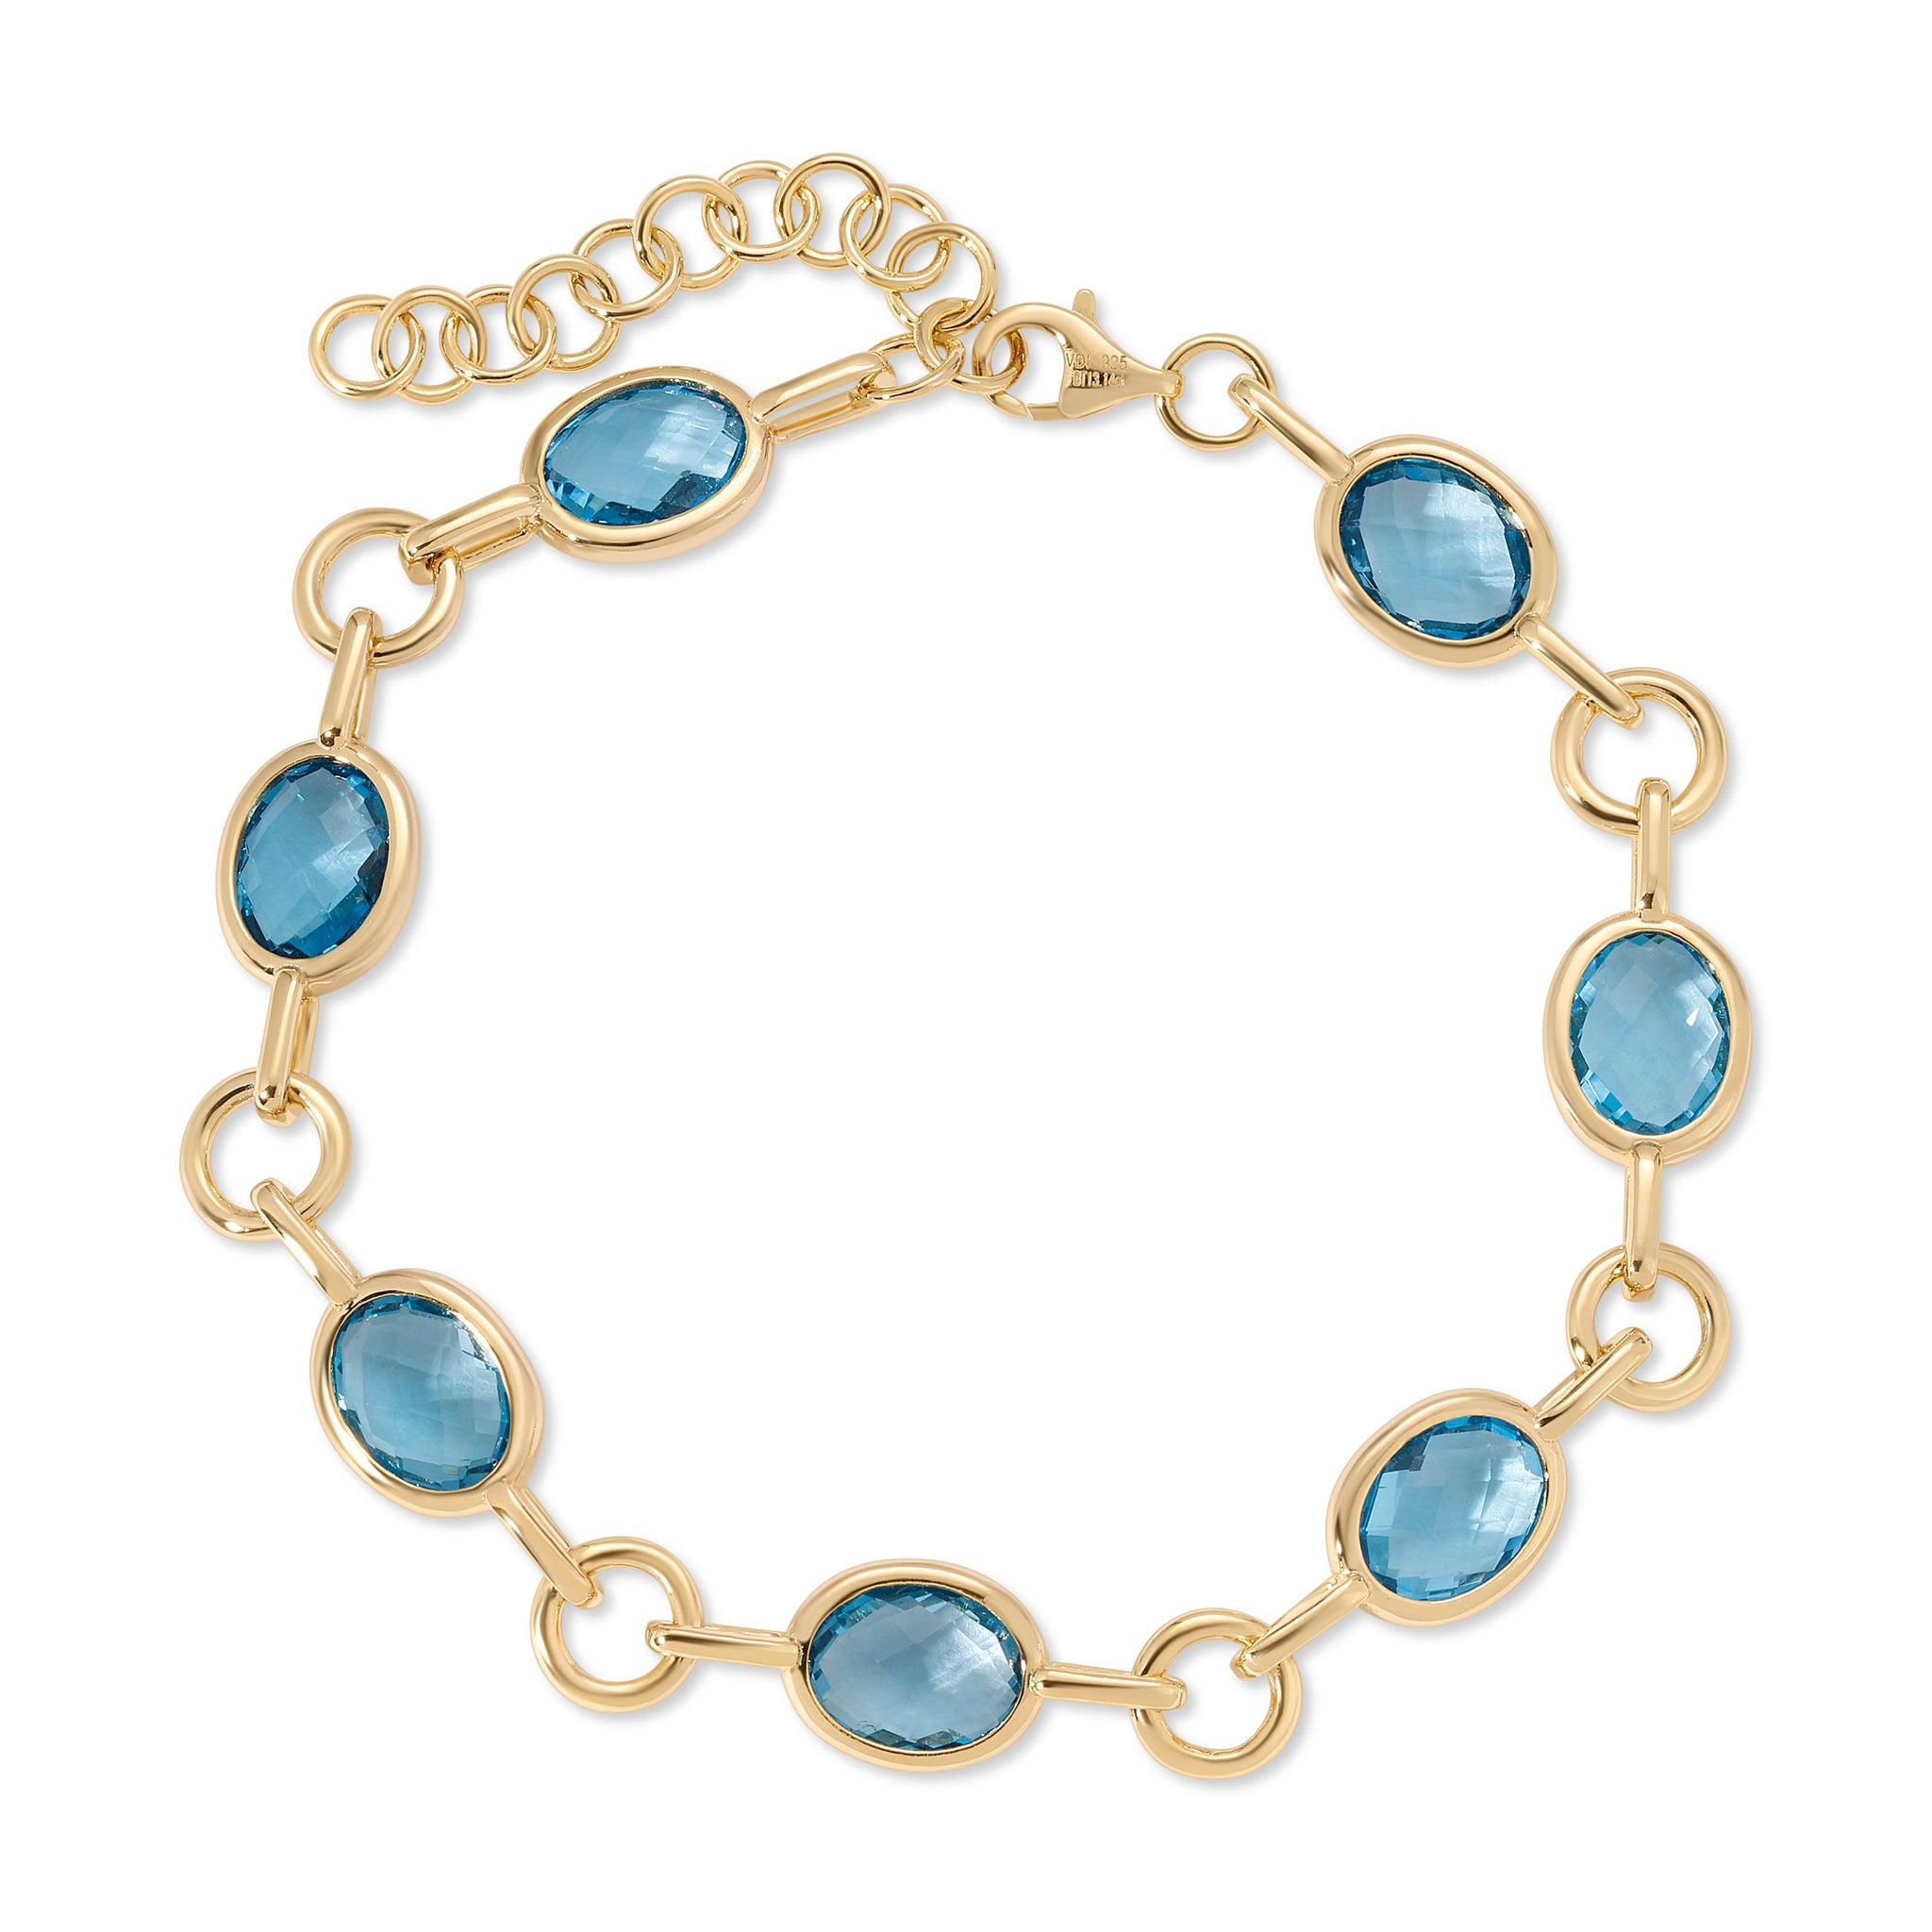 Color Candy Collection Bracelet 13.82 ctw with 7 Oval Shape Blue Topaz on 7.616 gr Gold Plated Silver